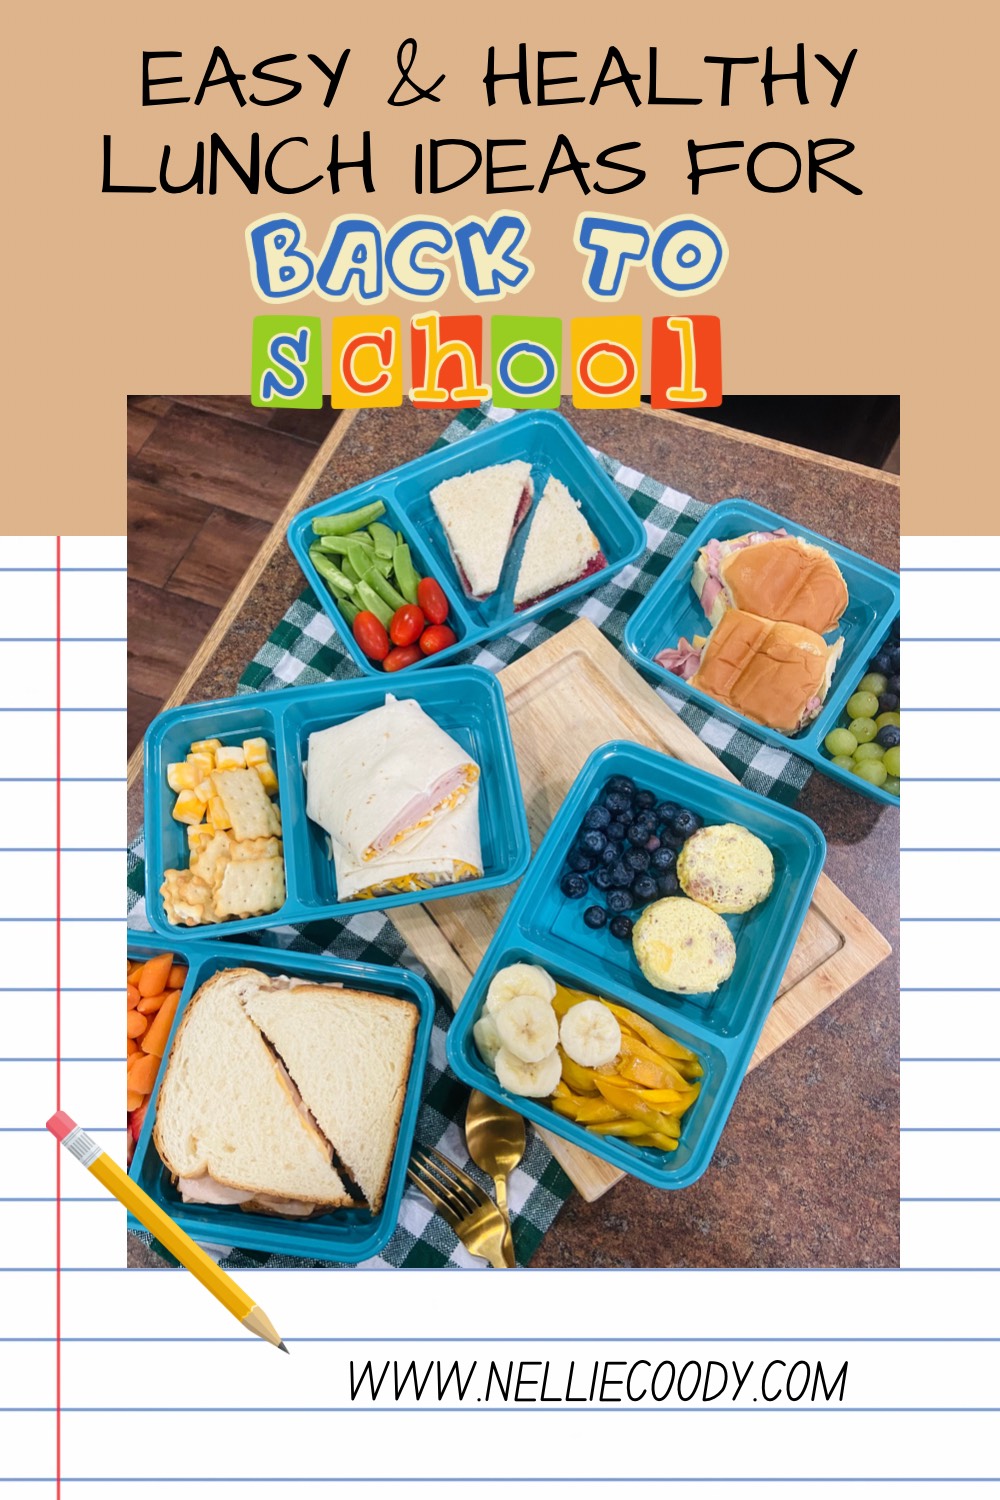 5 Quick & Easy Lunch Ideas for Back to School